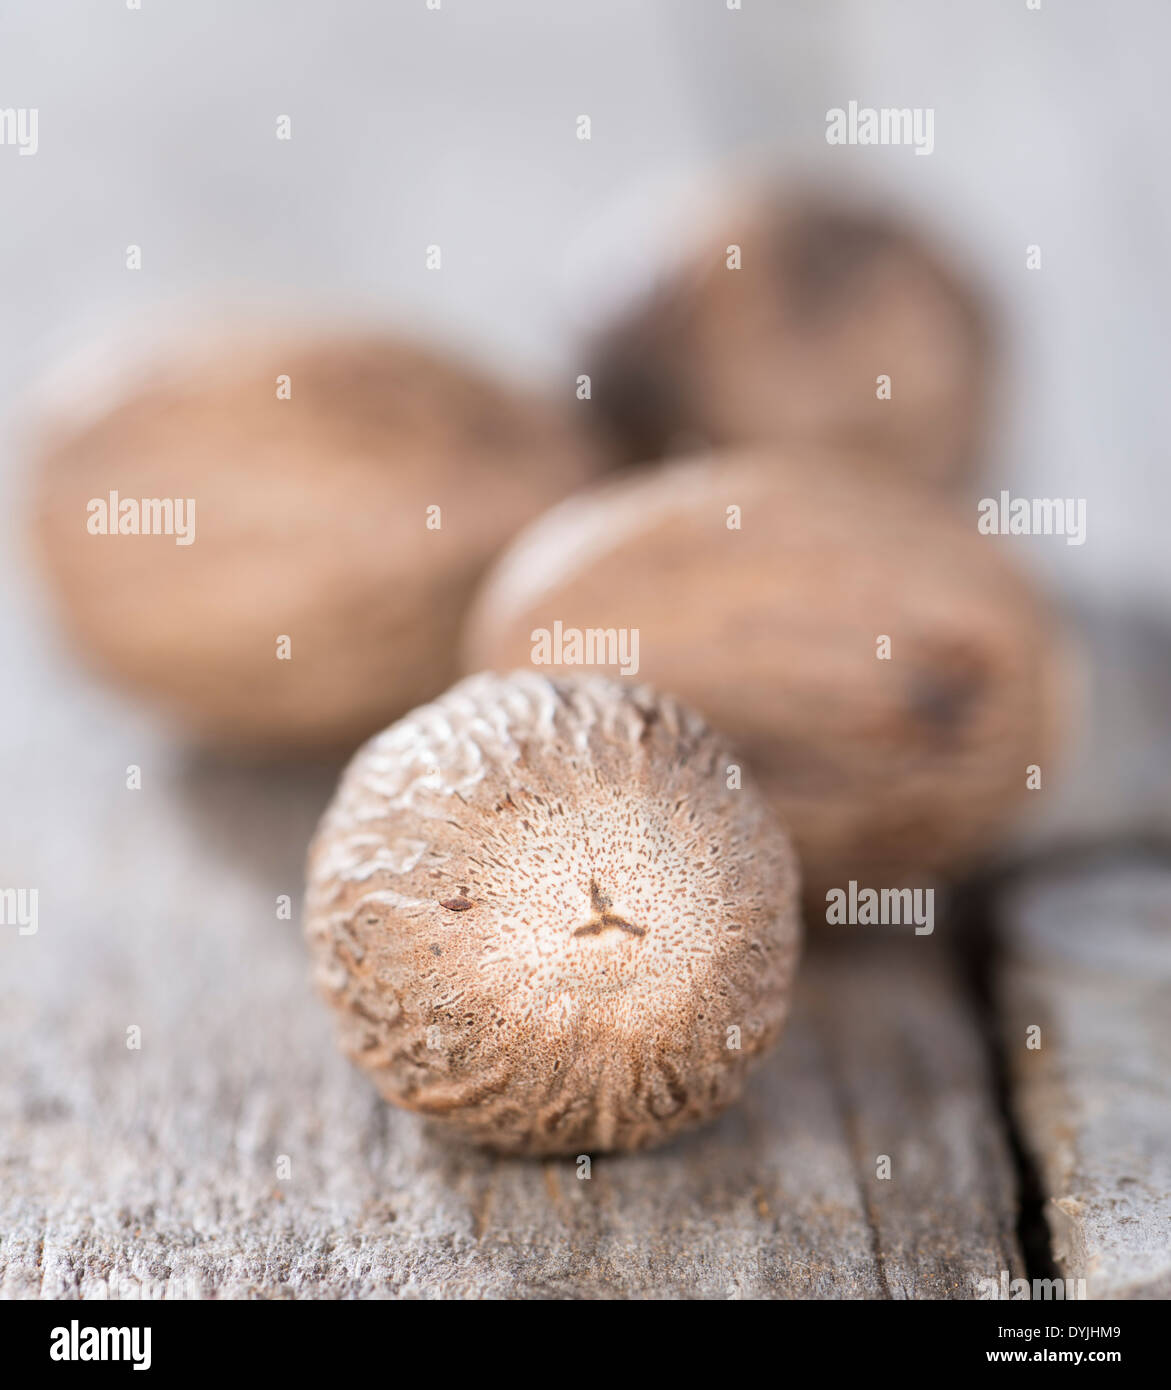 Some Nutmegs (close-up shot) on vintage background Stock Photo